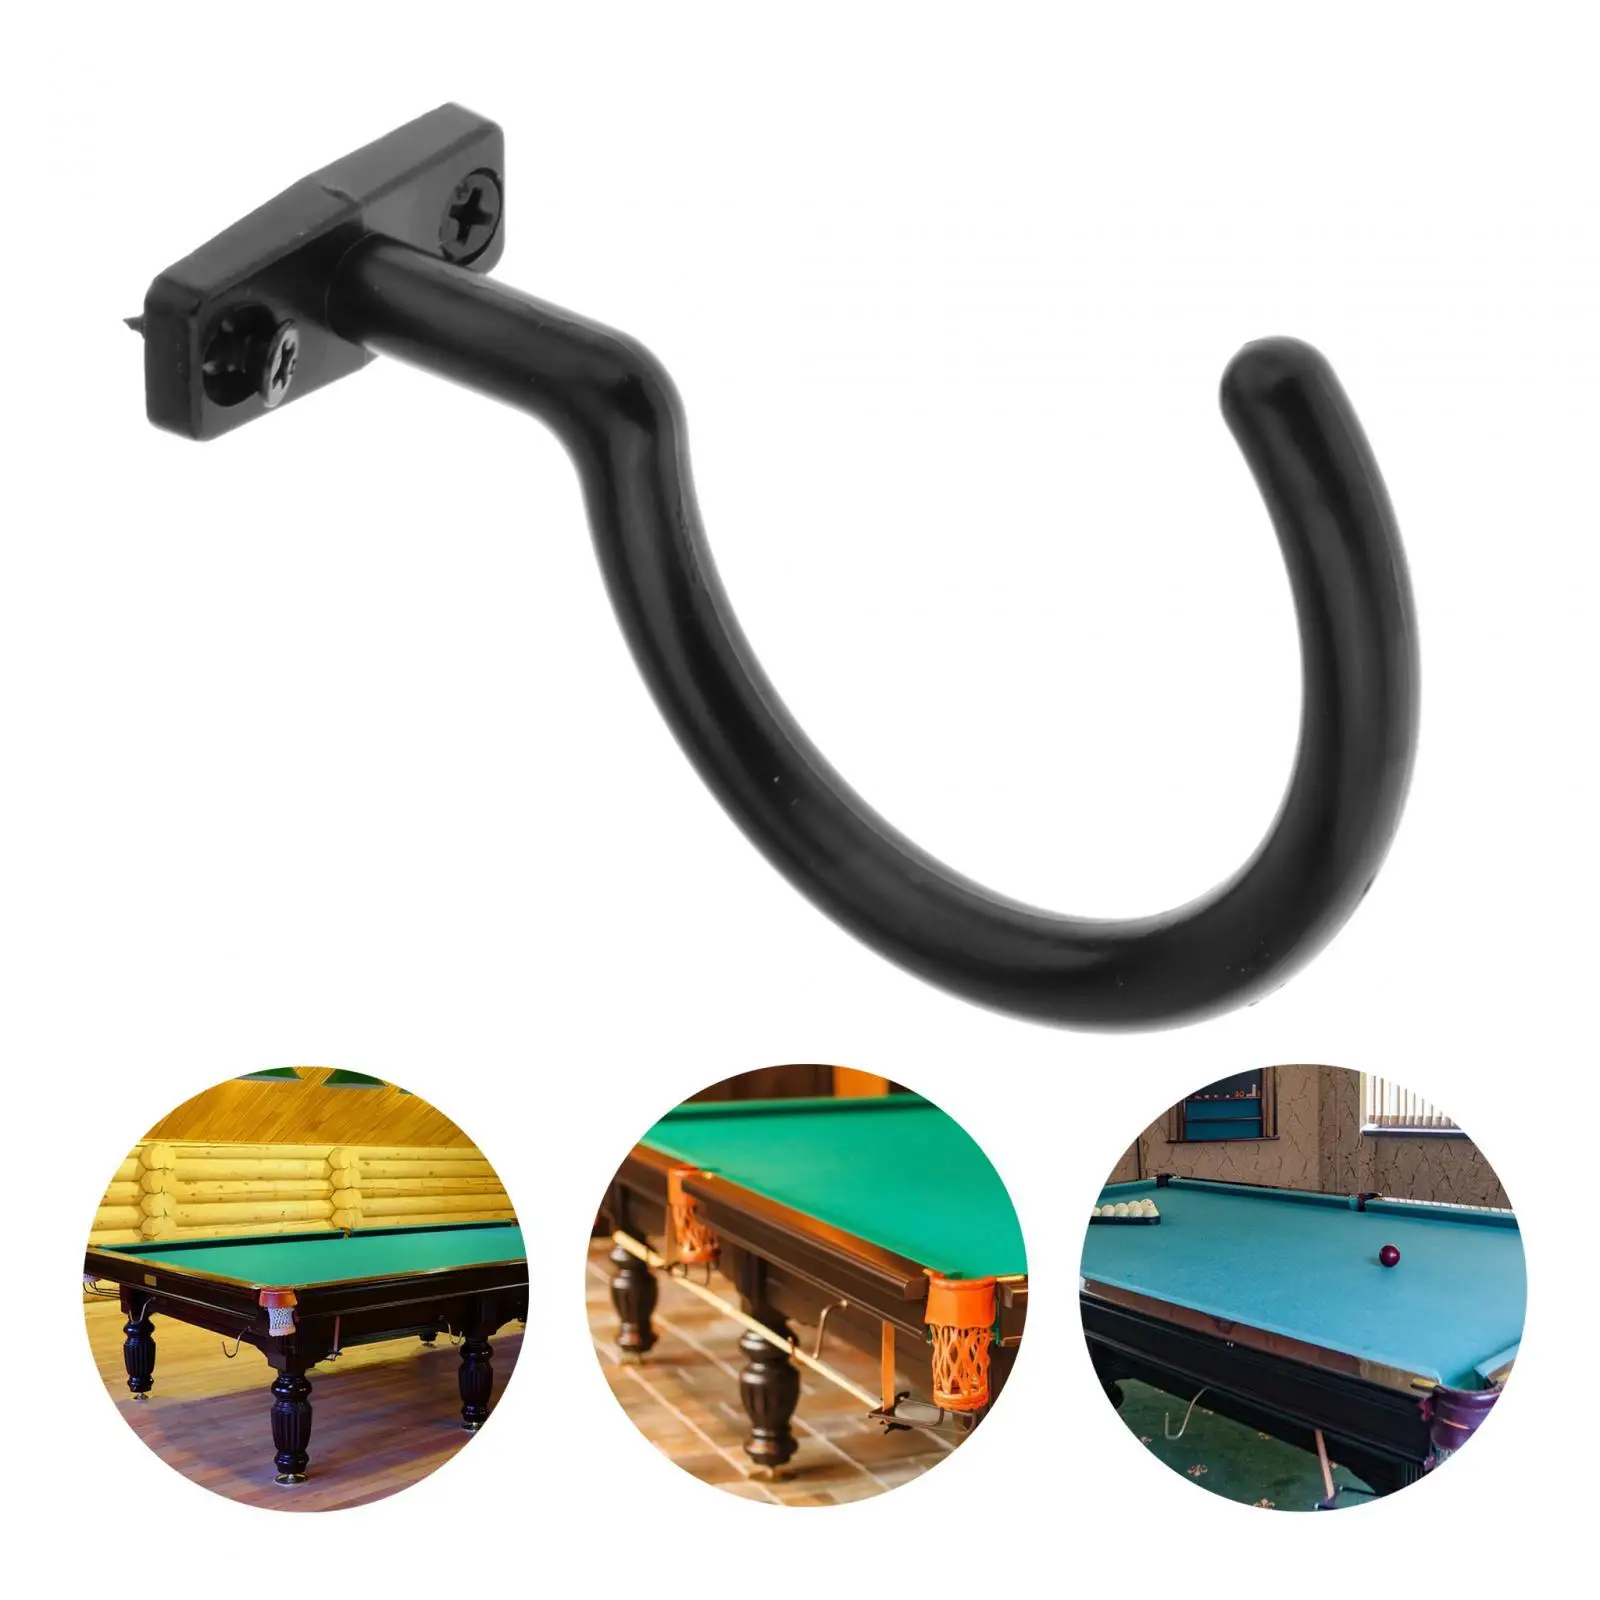 Snooker Billiard Table Board Cue Hook with Mounting Screws Pool Table Rack for Indoor Games Billiard Snooker Tables Accessories